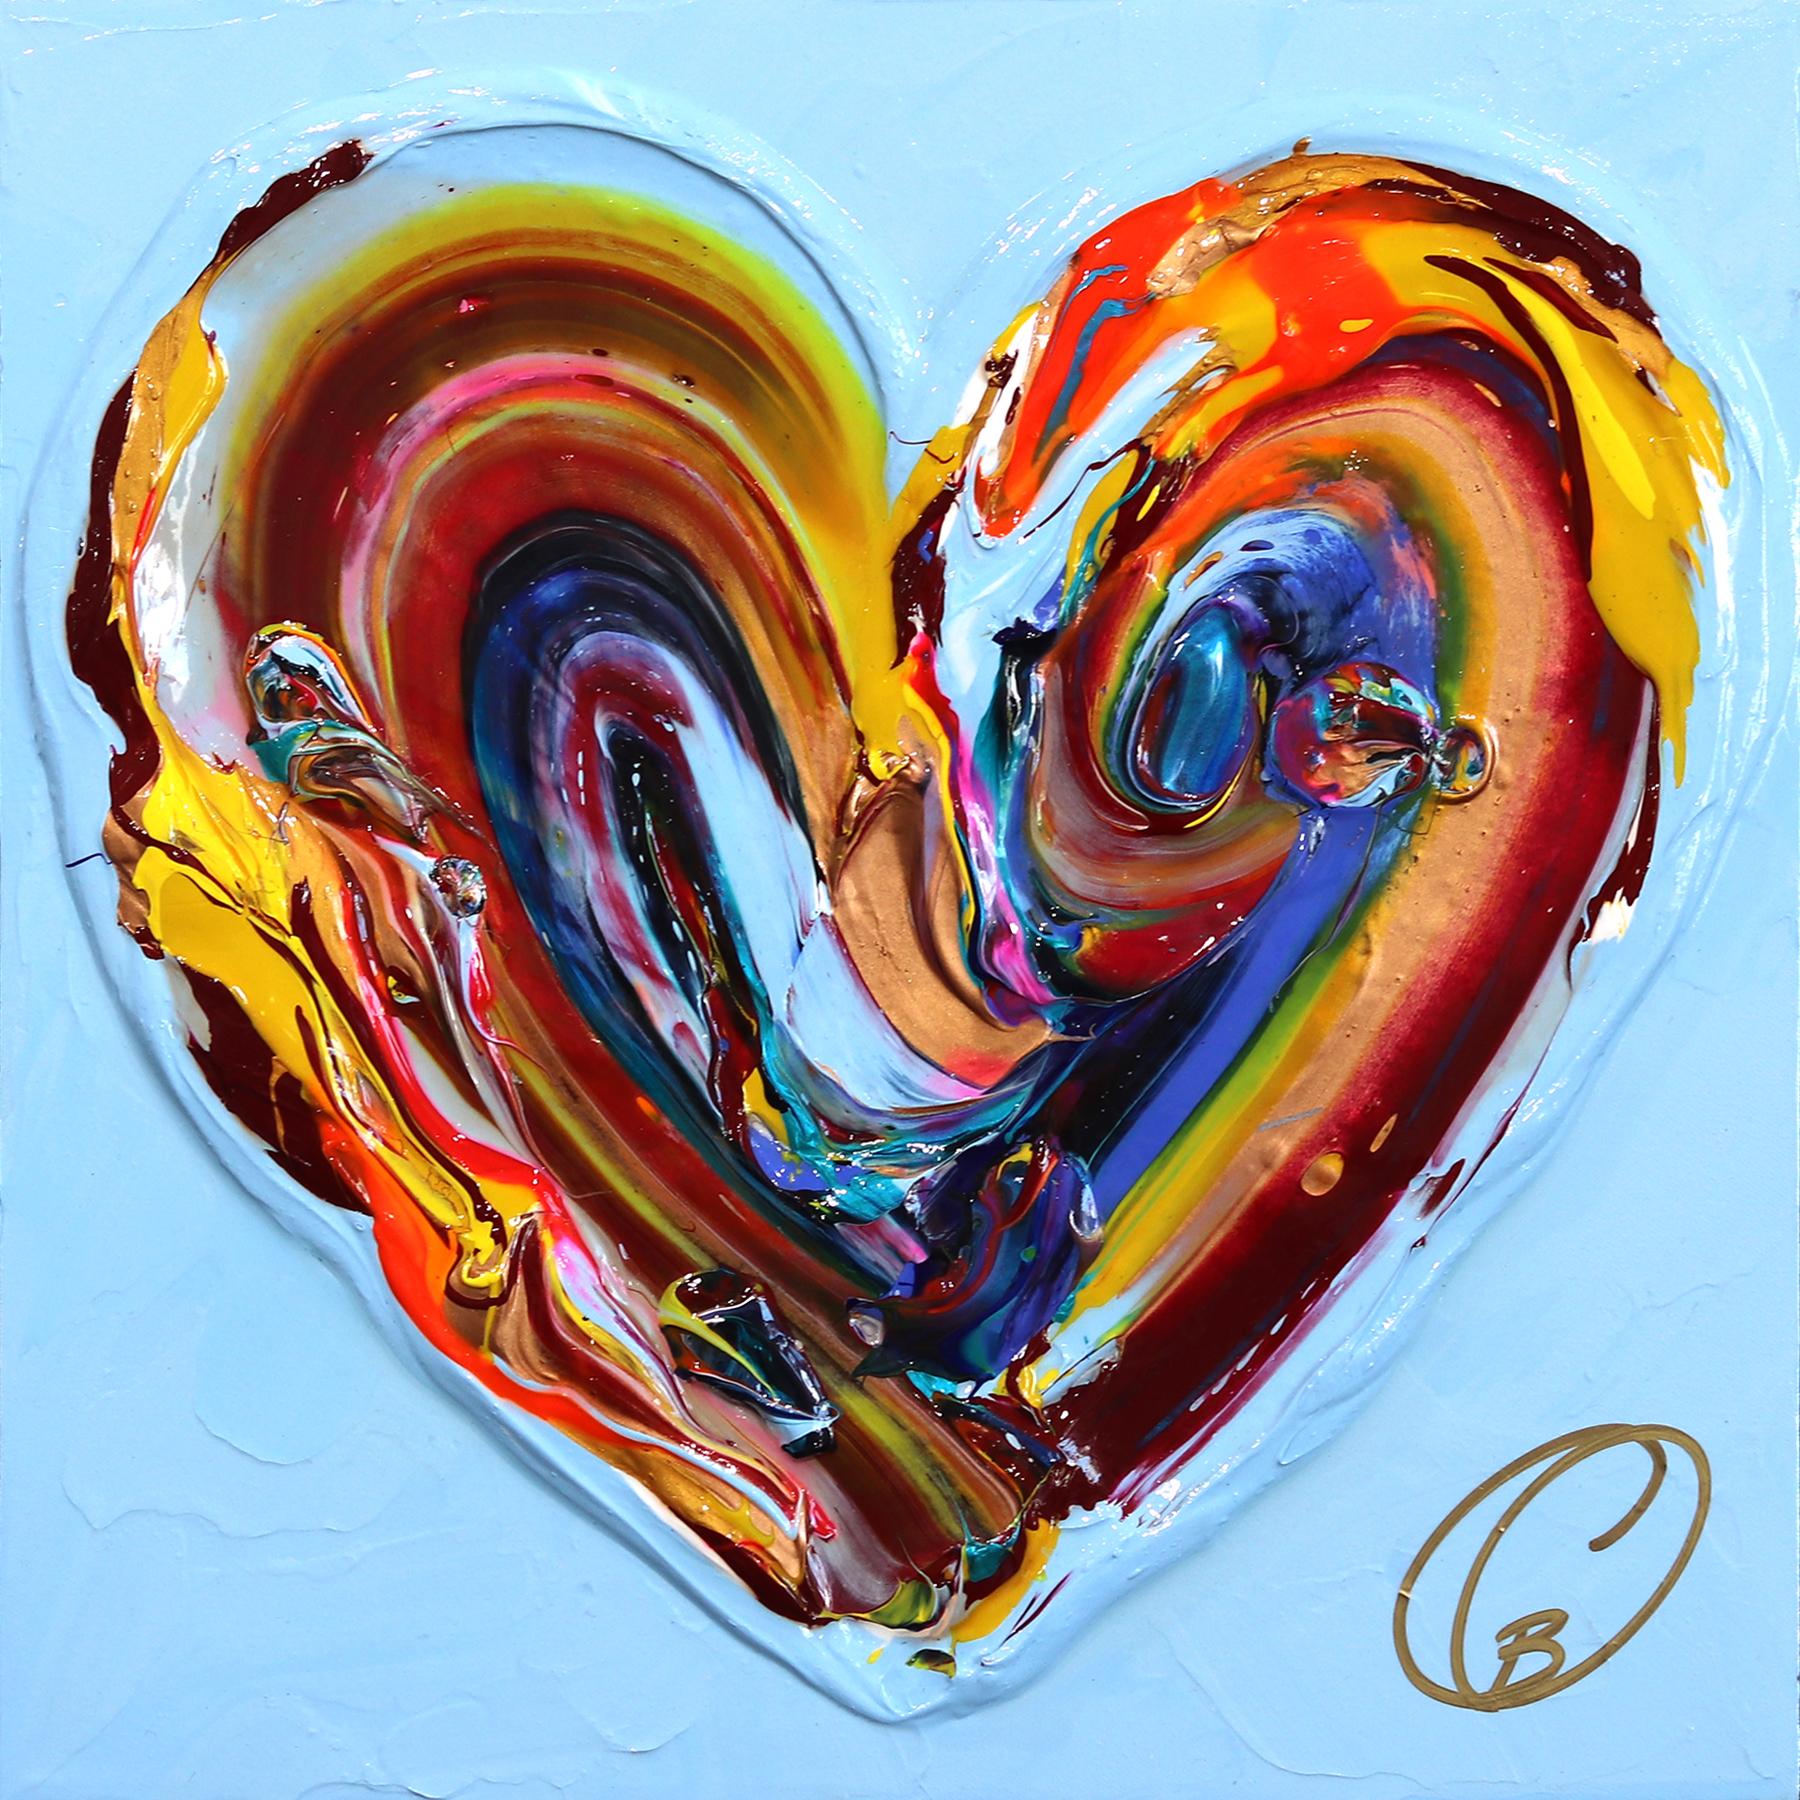 Cynthia Coulombe Bégin Figurative Painting - Love In The Sky II - Thick Texture Colorful Heart Artwork on Vibrant Blue Paint